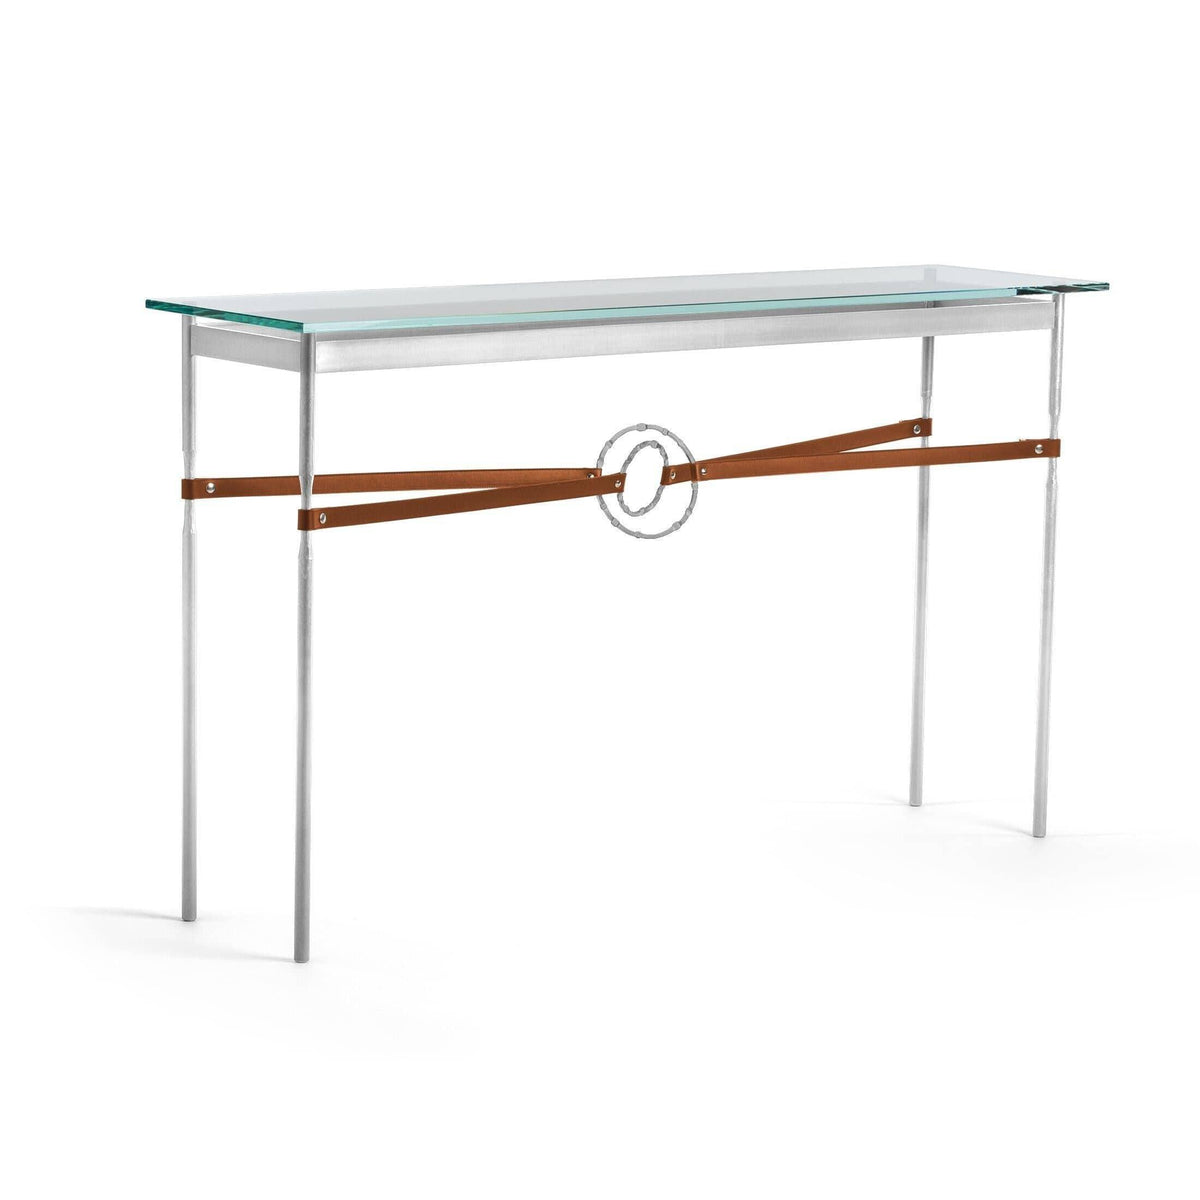 Hubbardton Forge - Equus Chestnut Leather Console Table - 750118-85-82-LC-VA0714 | Montreal Lighting & Hardware